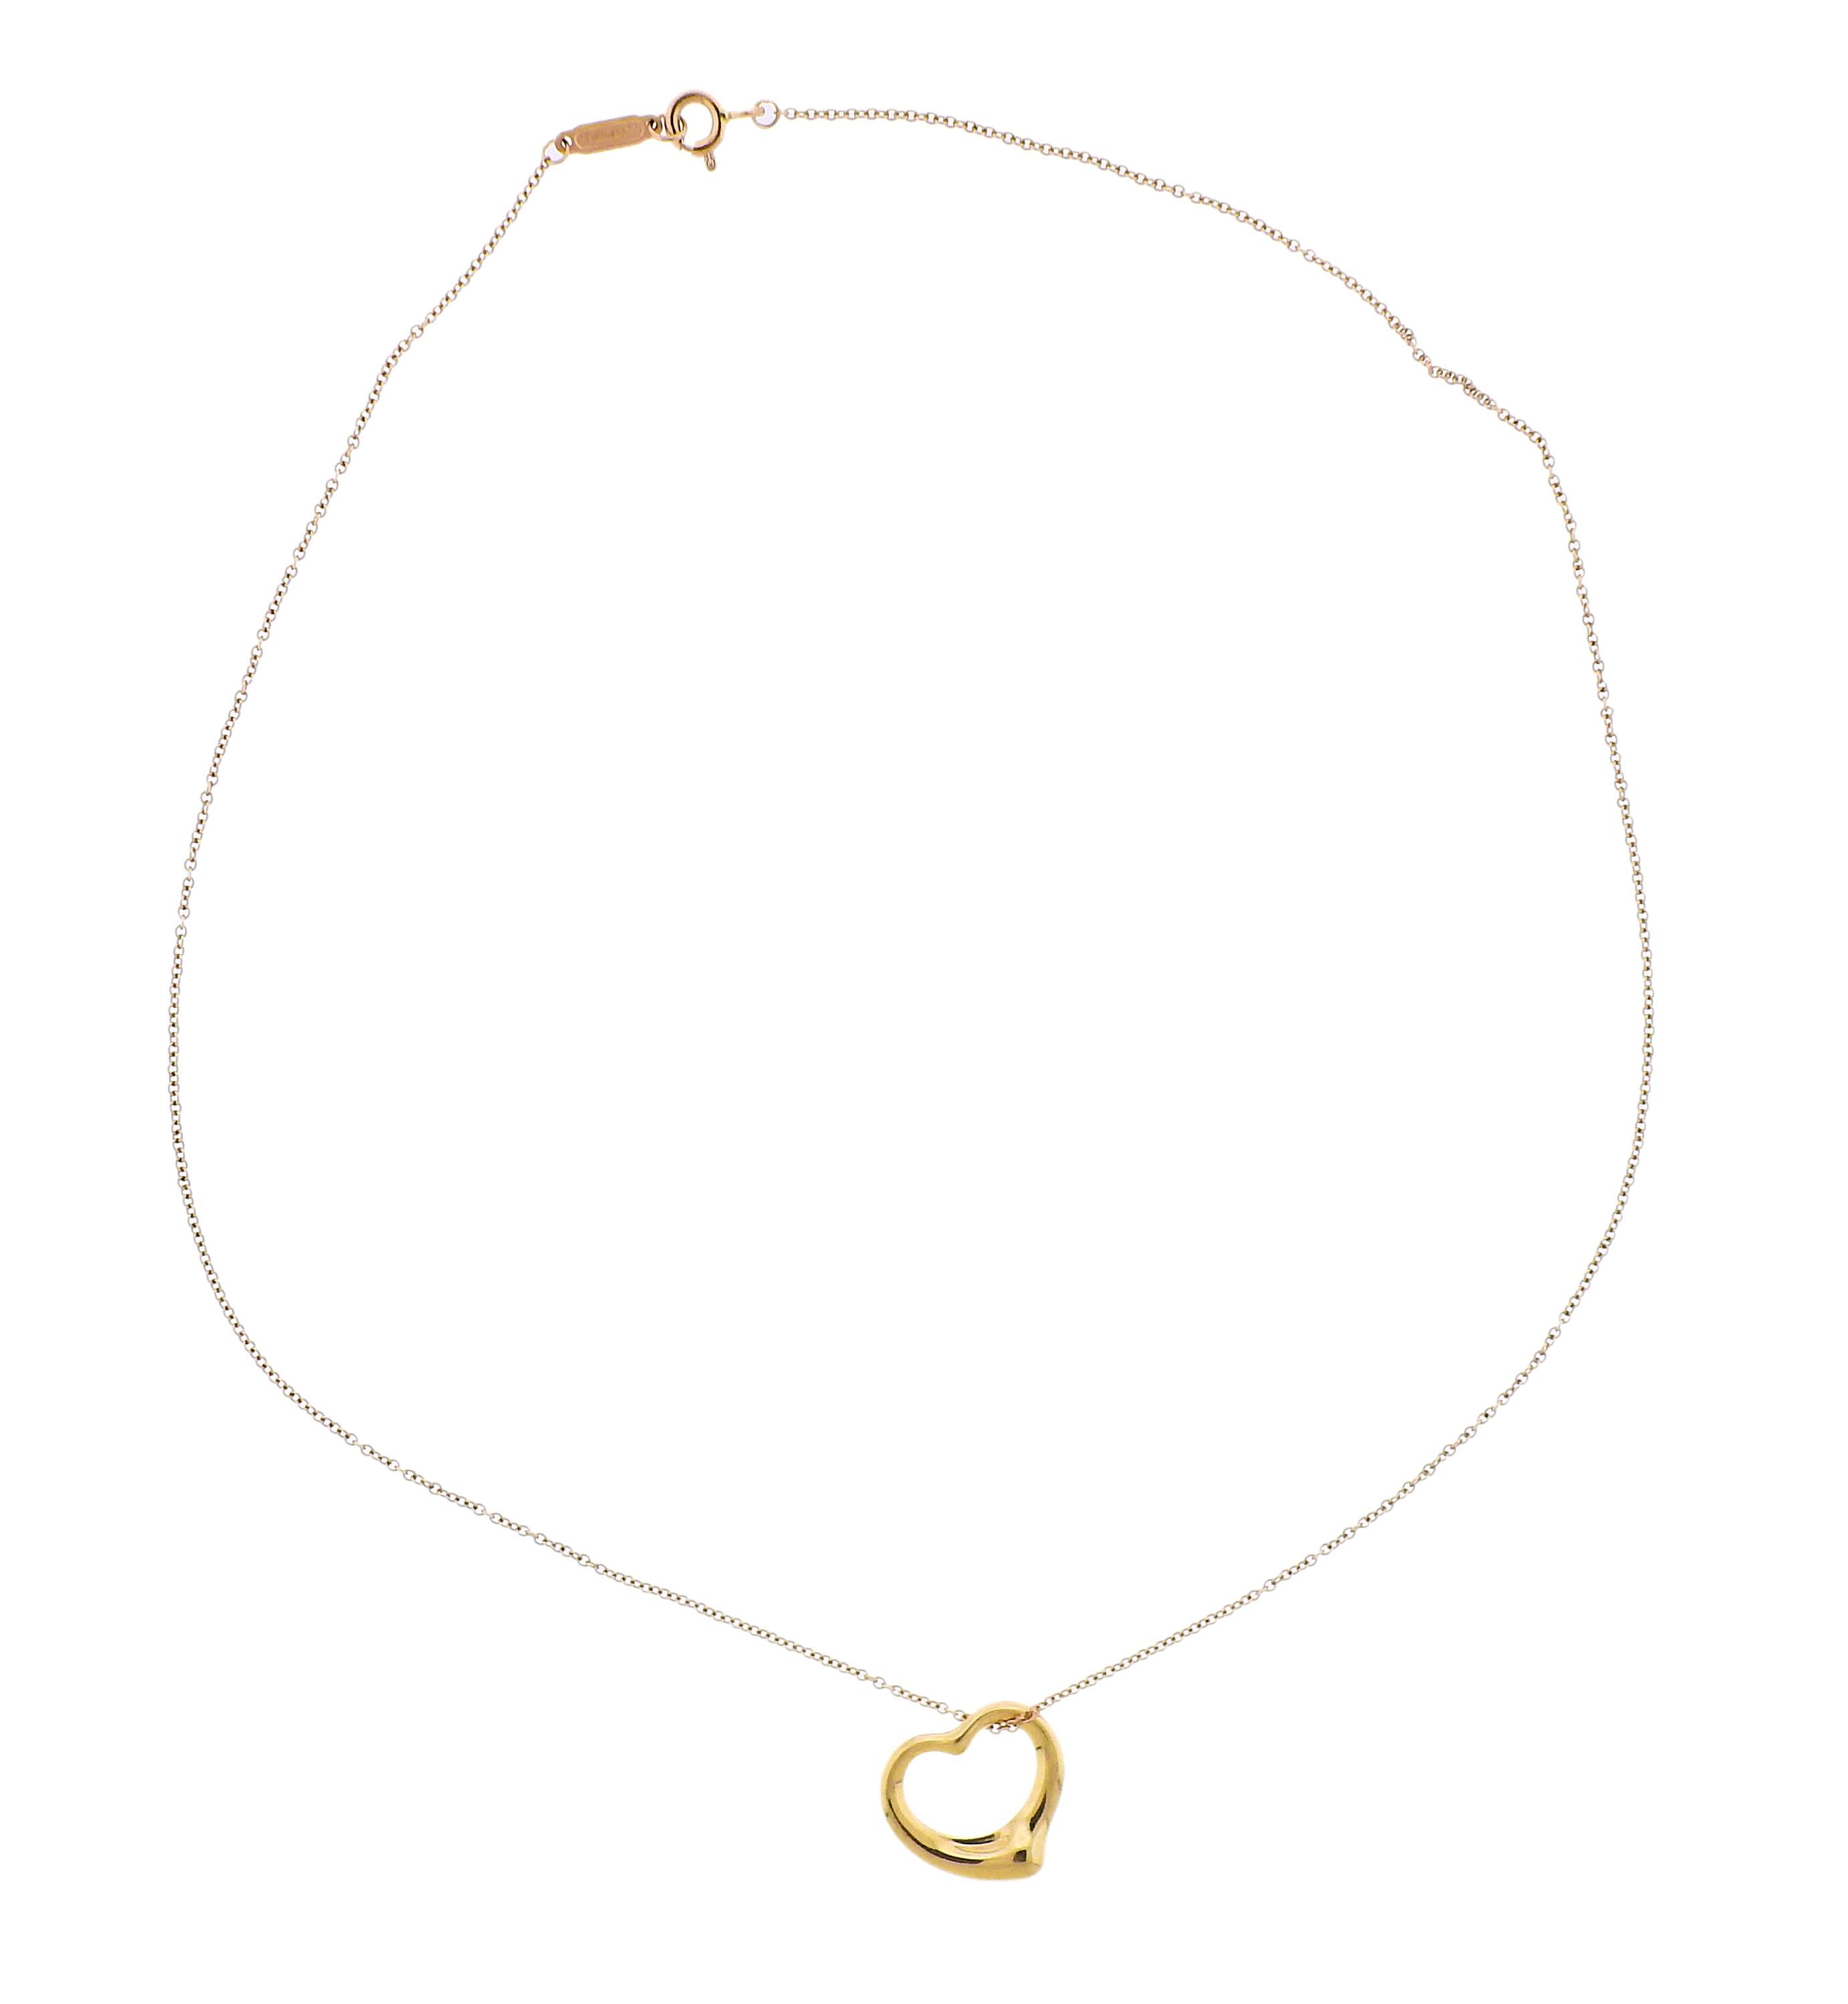 18k gold Open Heart pendant, suspended on a chain. Pendant designed by Elsa Peretti for Tiffany & Co. Necklace is 16